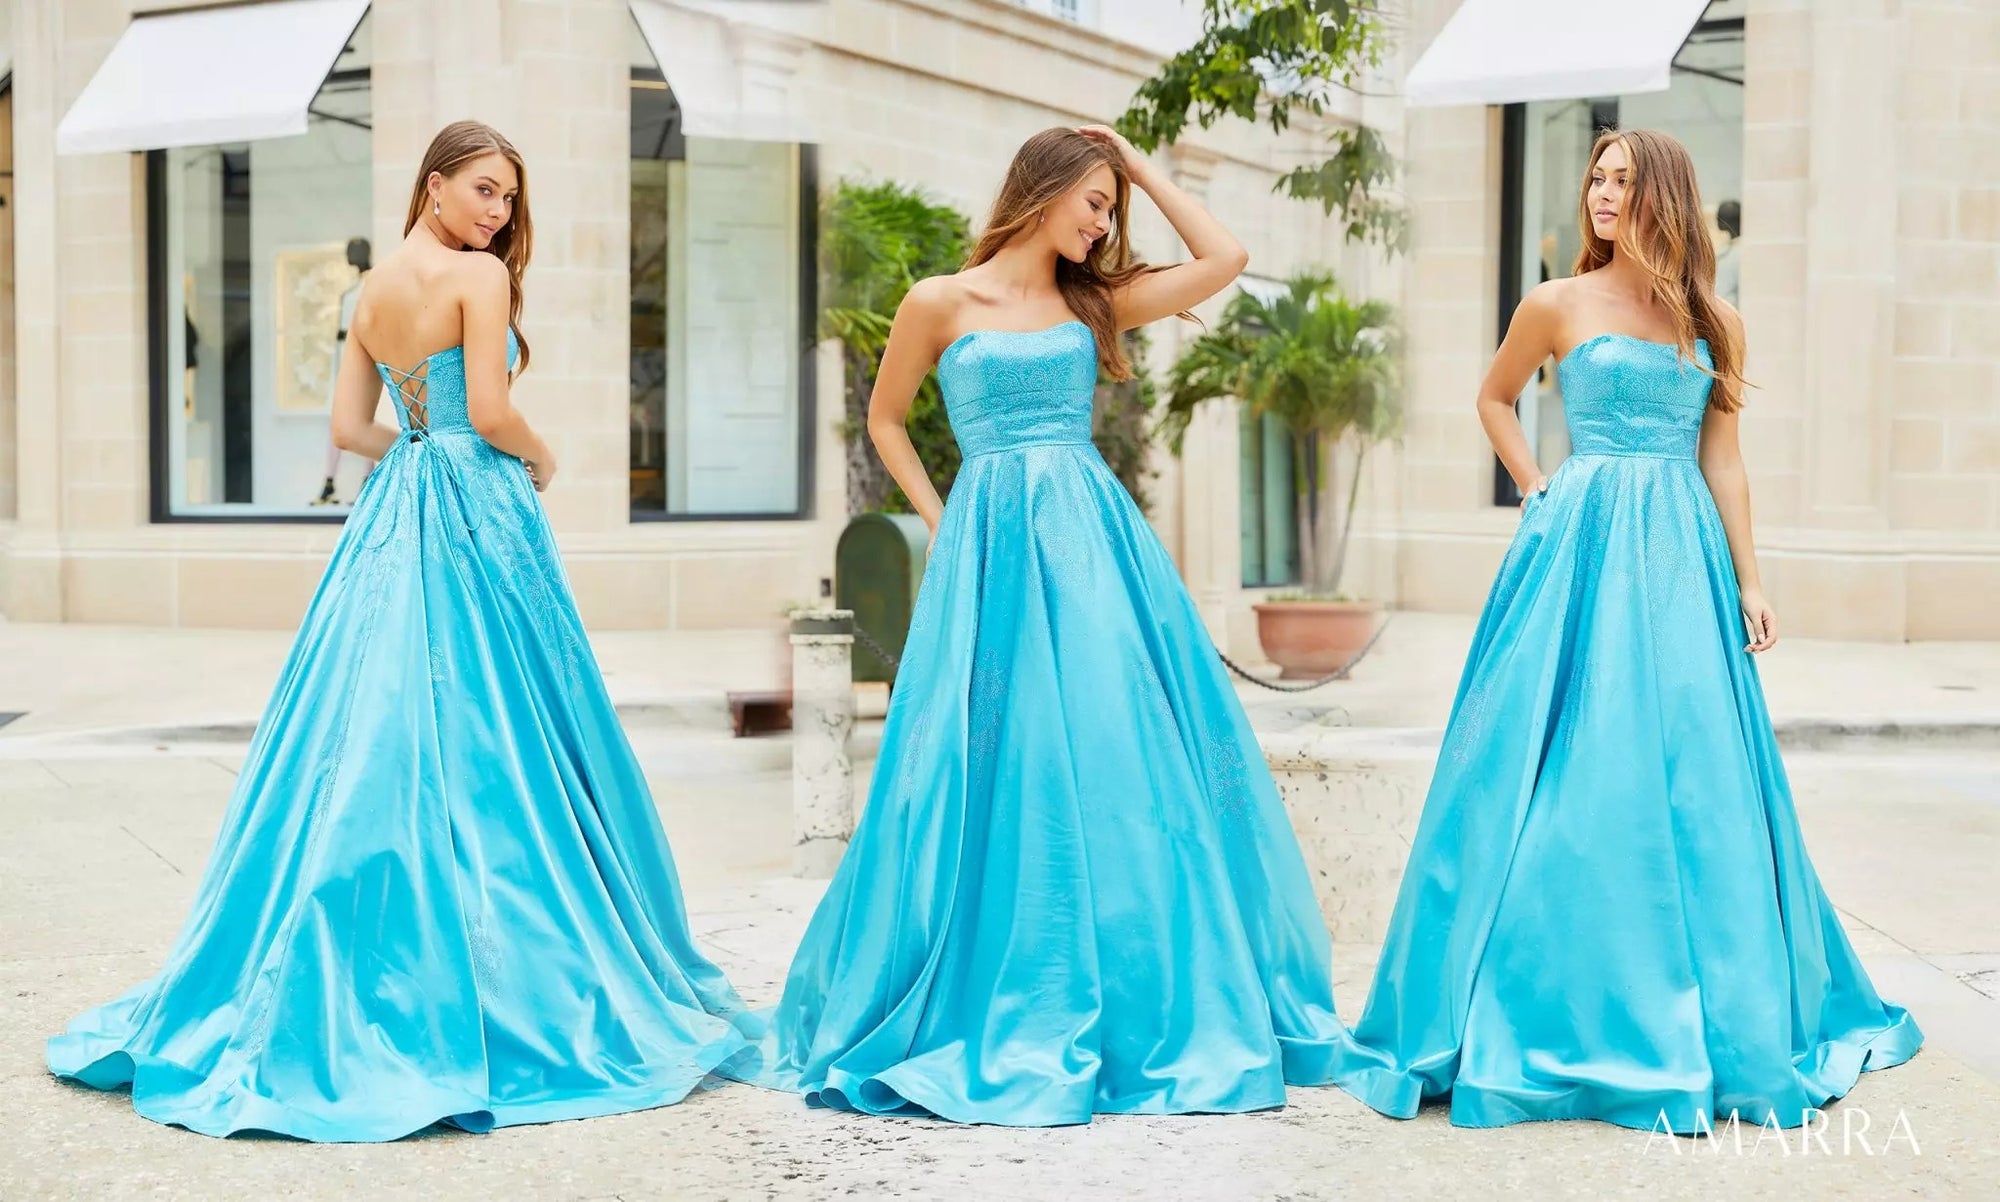 Prom Dresses London | Ball Gowns, Prom & Evening Dresses